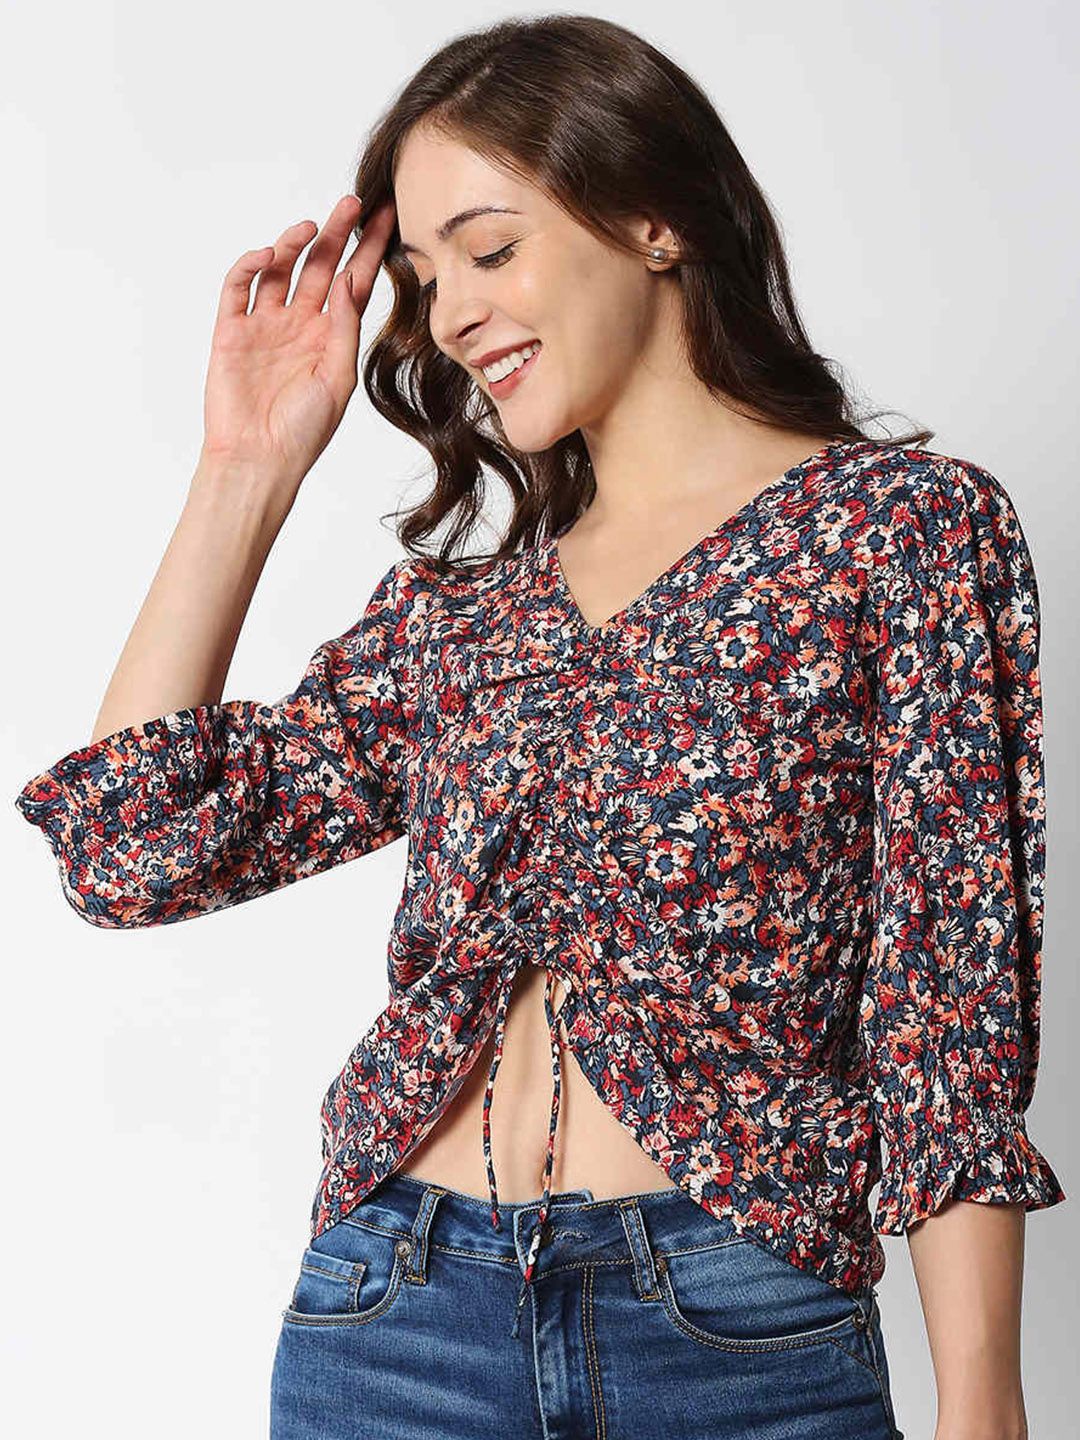 Pepe Jeans Women Red Floral Print Crop Top Price in India